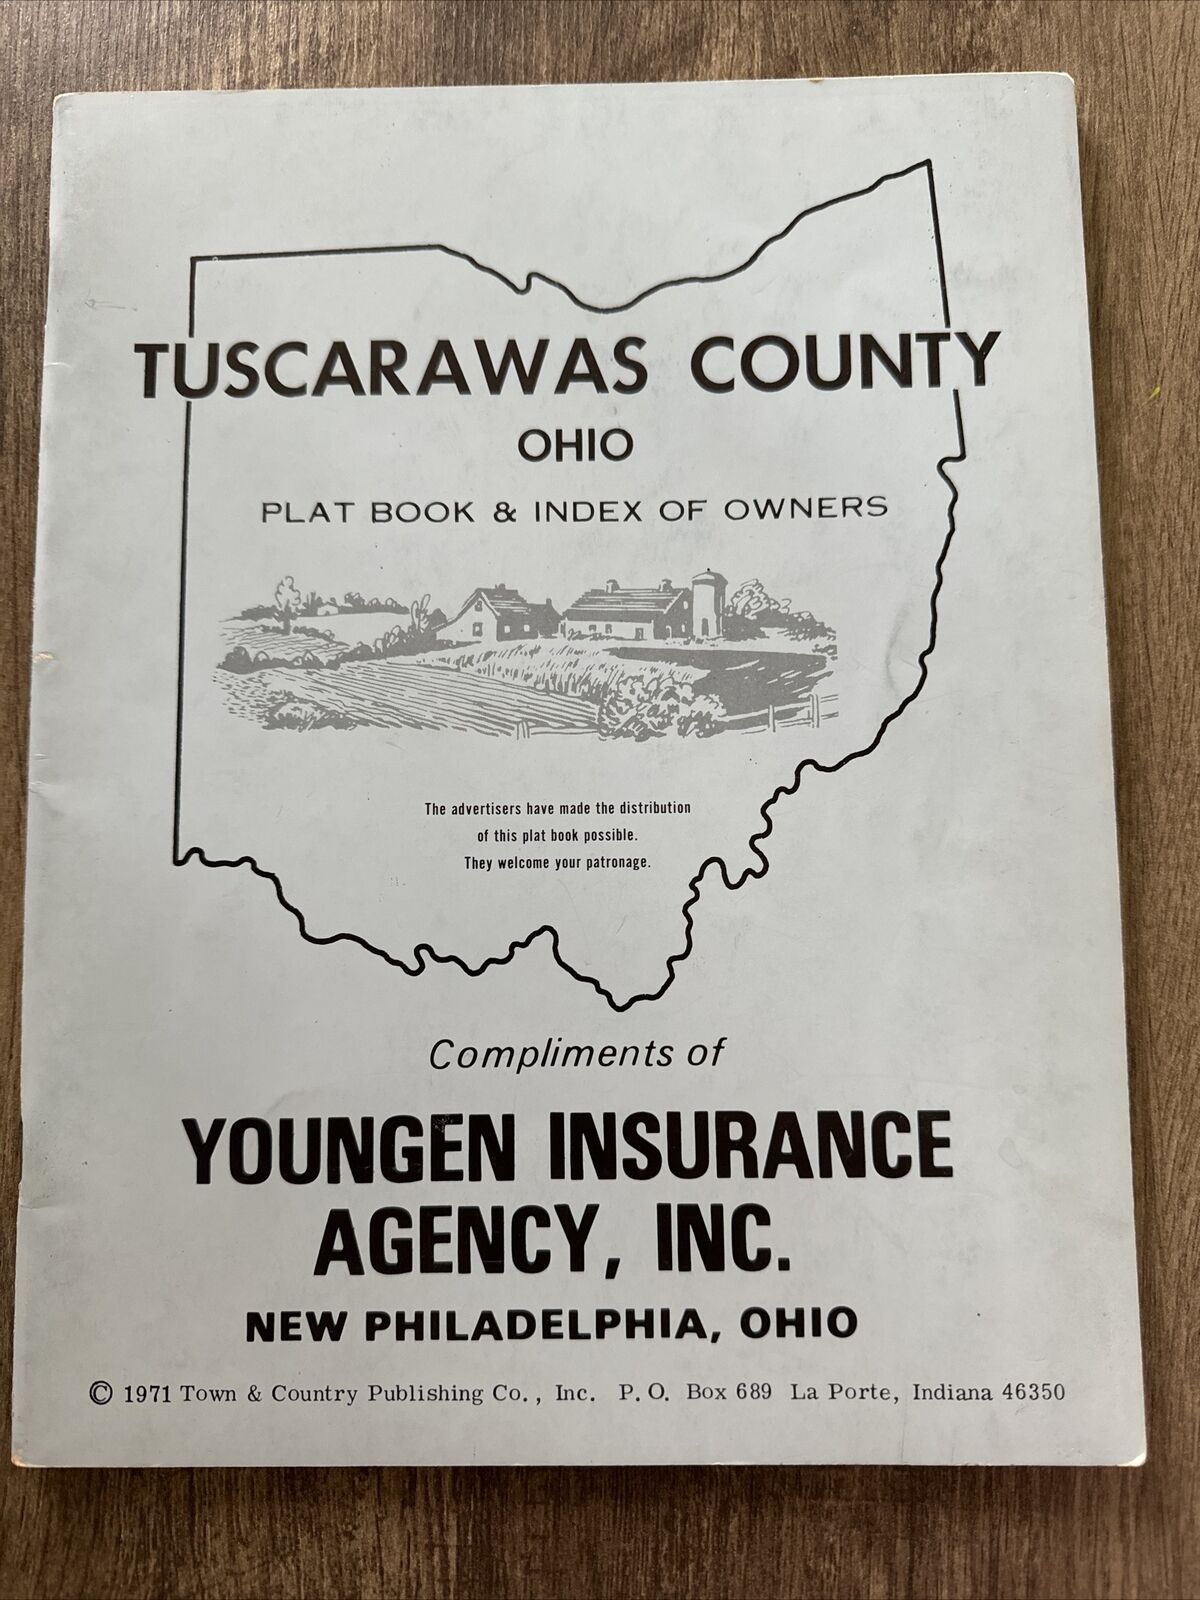 1971 Plat Maps Of Tuscarawas County Ohio Book Plat Book & Index of Owners